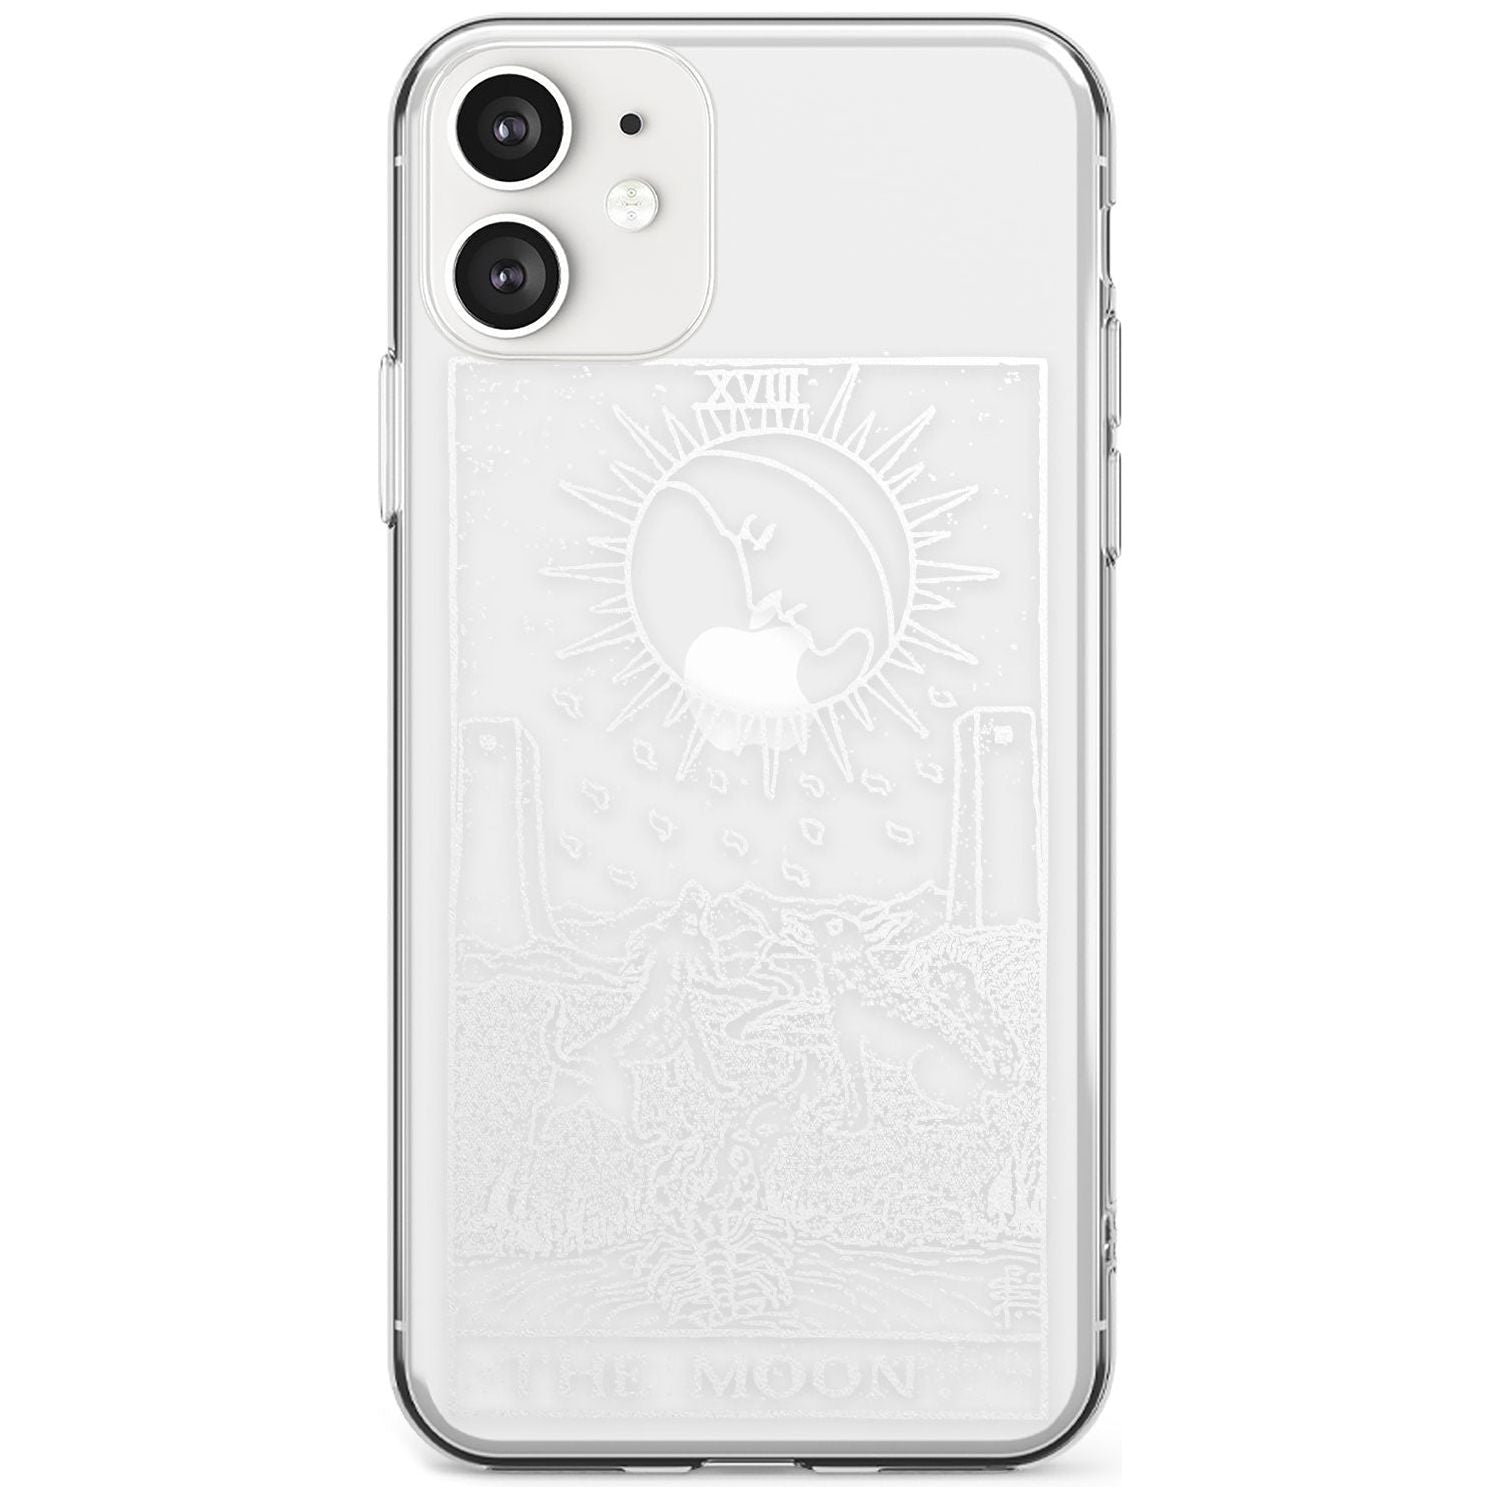 The Moon Tarot Card - White Transparent Black Impact Phone Case for iPhone 11